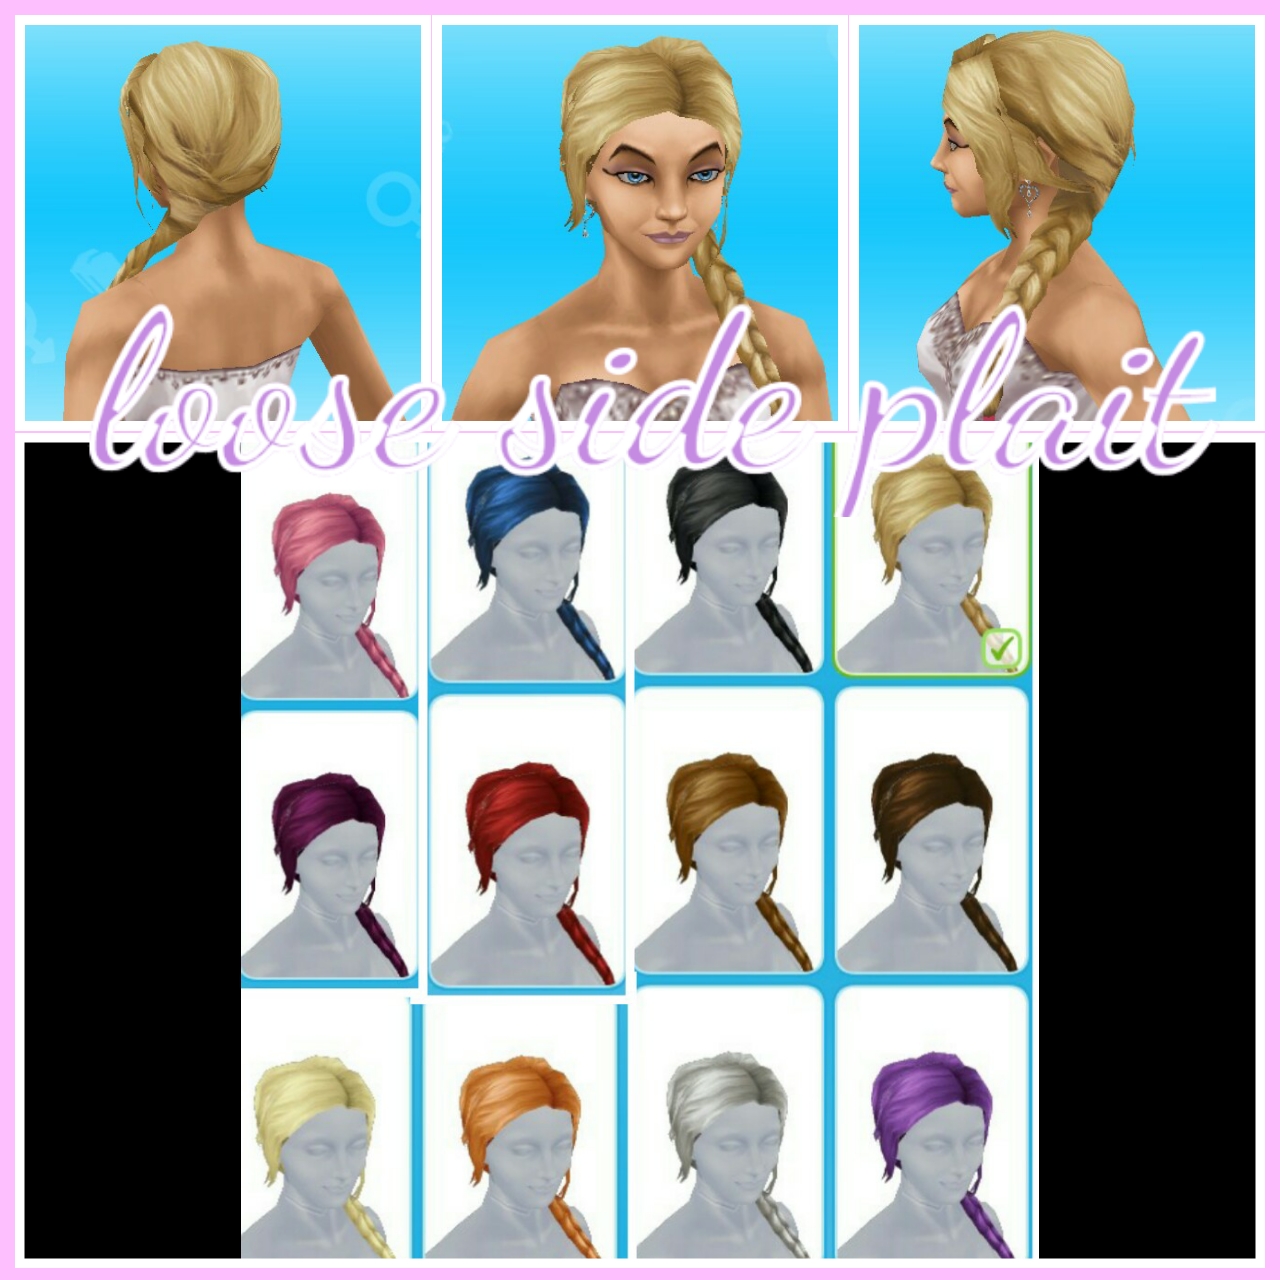 The Sims Freeplay- Boutique Hairstyles Review – The Girl Who pertaining to The Sims Freeplay Hairstyles